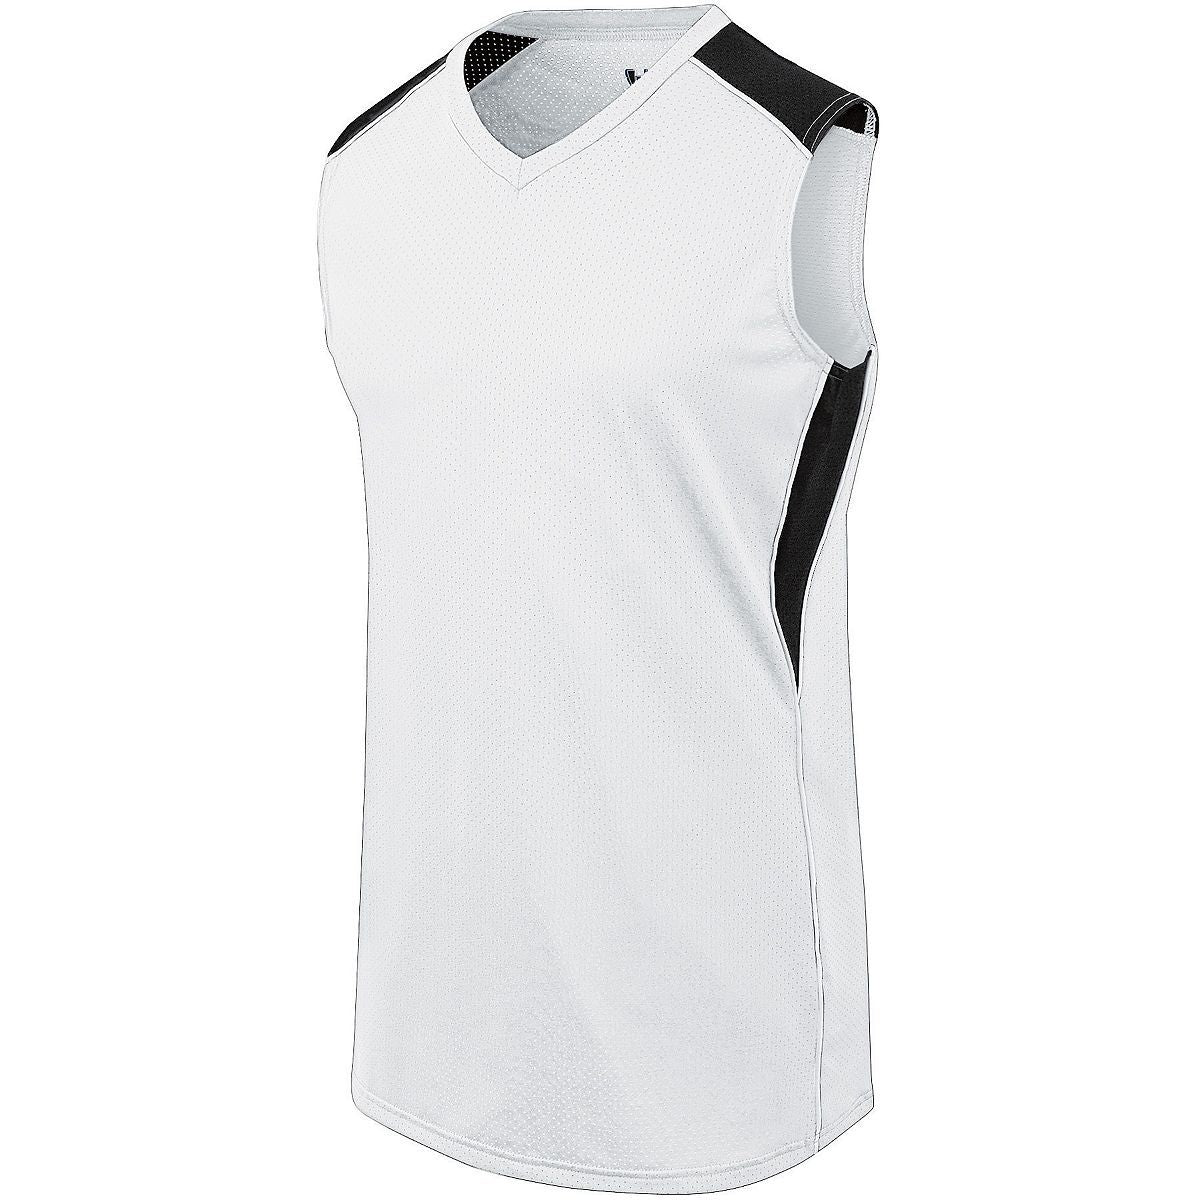 Augusta Sportswear Girls Dynamite Jersey in White/Black/White  -Part of the Girls, Augusta-Products, Softball, Girls-Jersey, Shirts product lines at KanaleyCreations.com